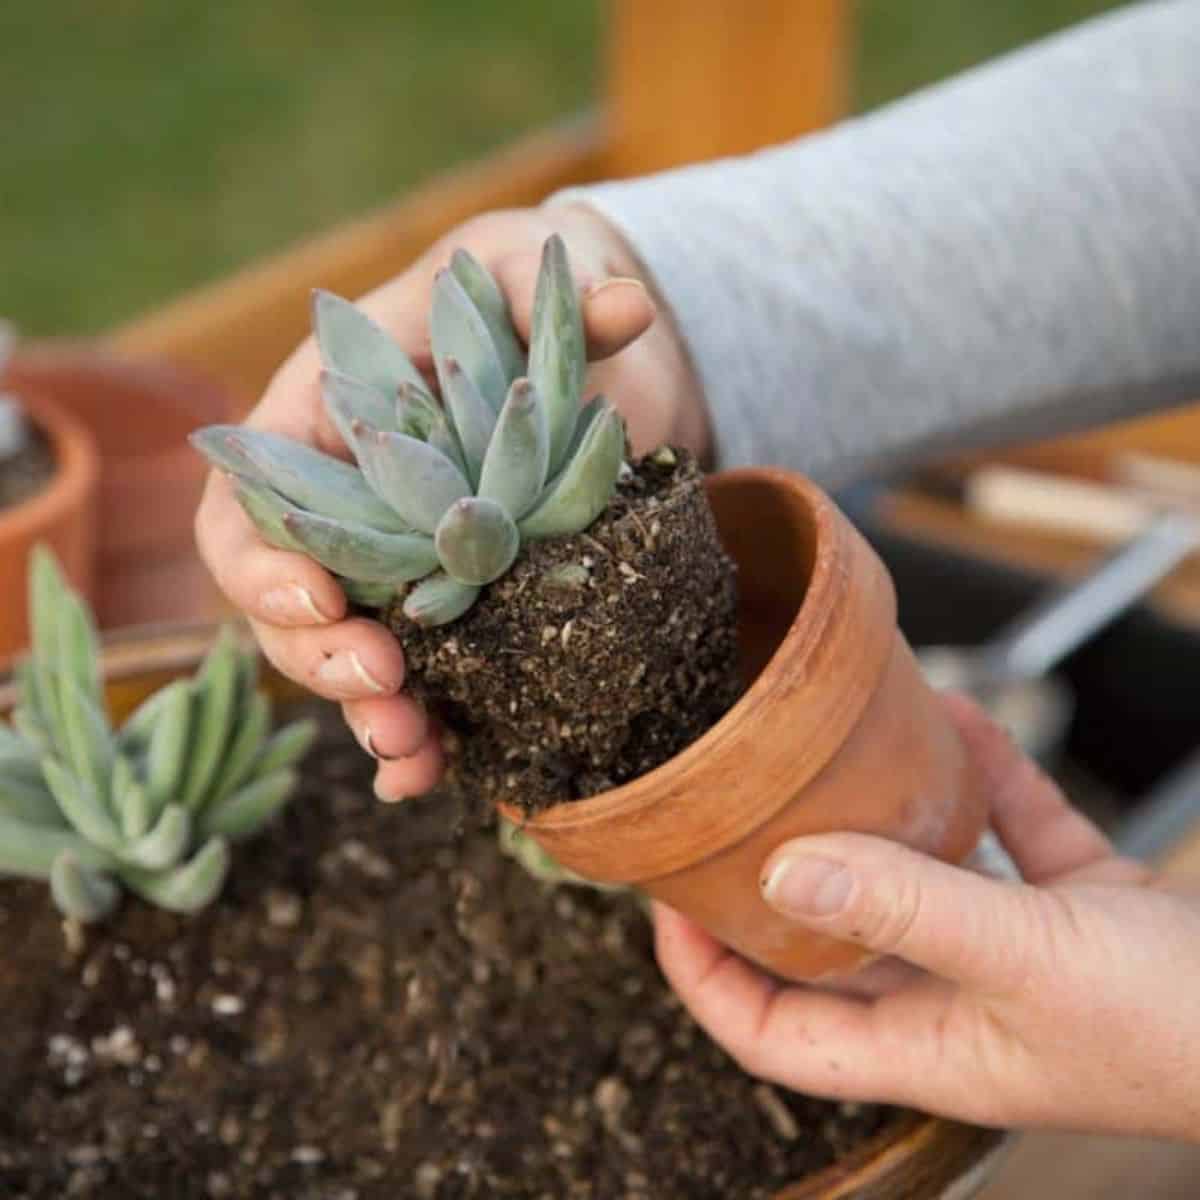 Hands pulling a succulent plant from a terracotta pot.